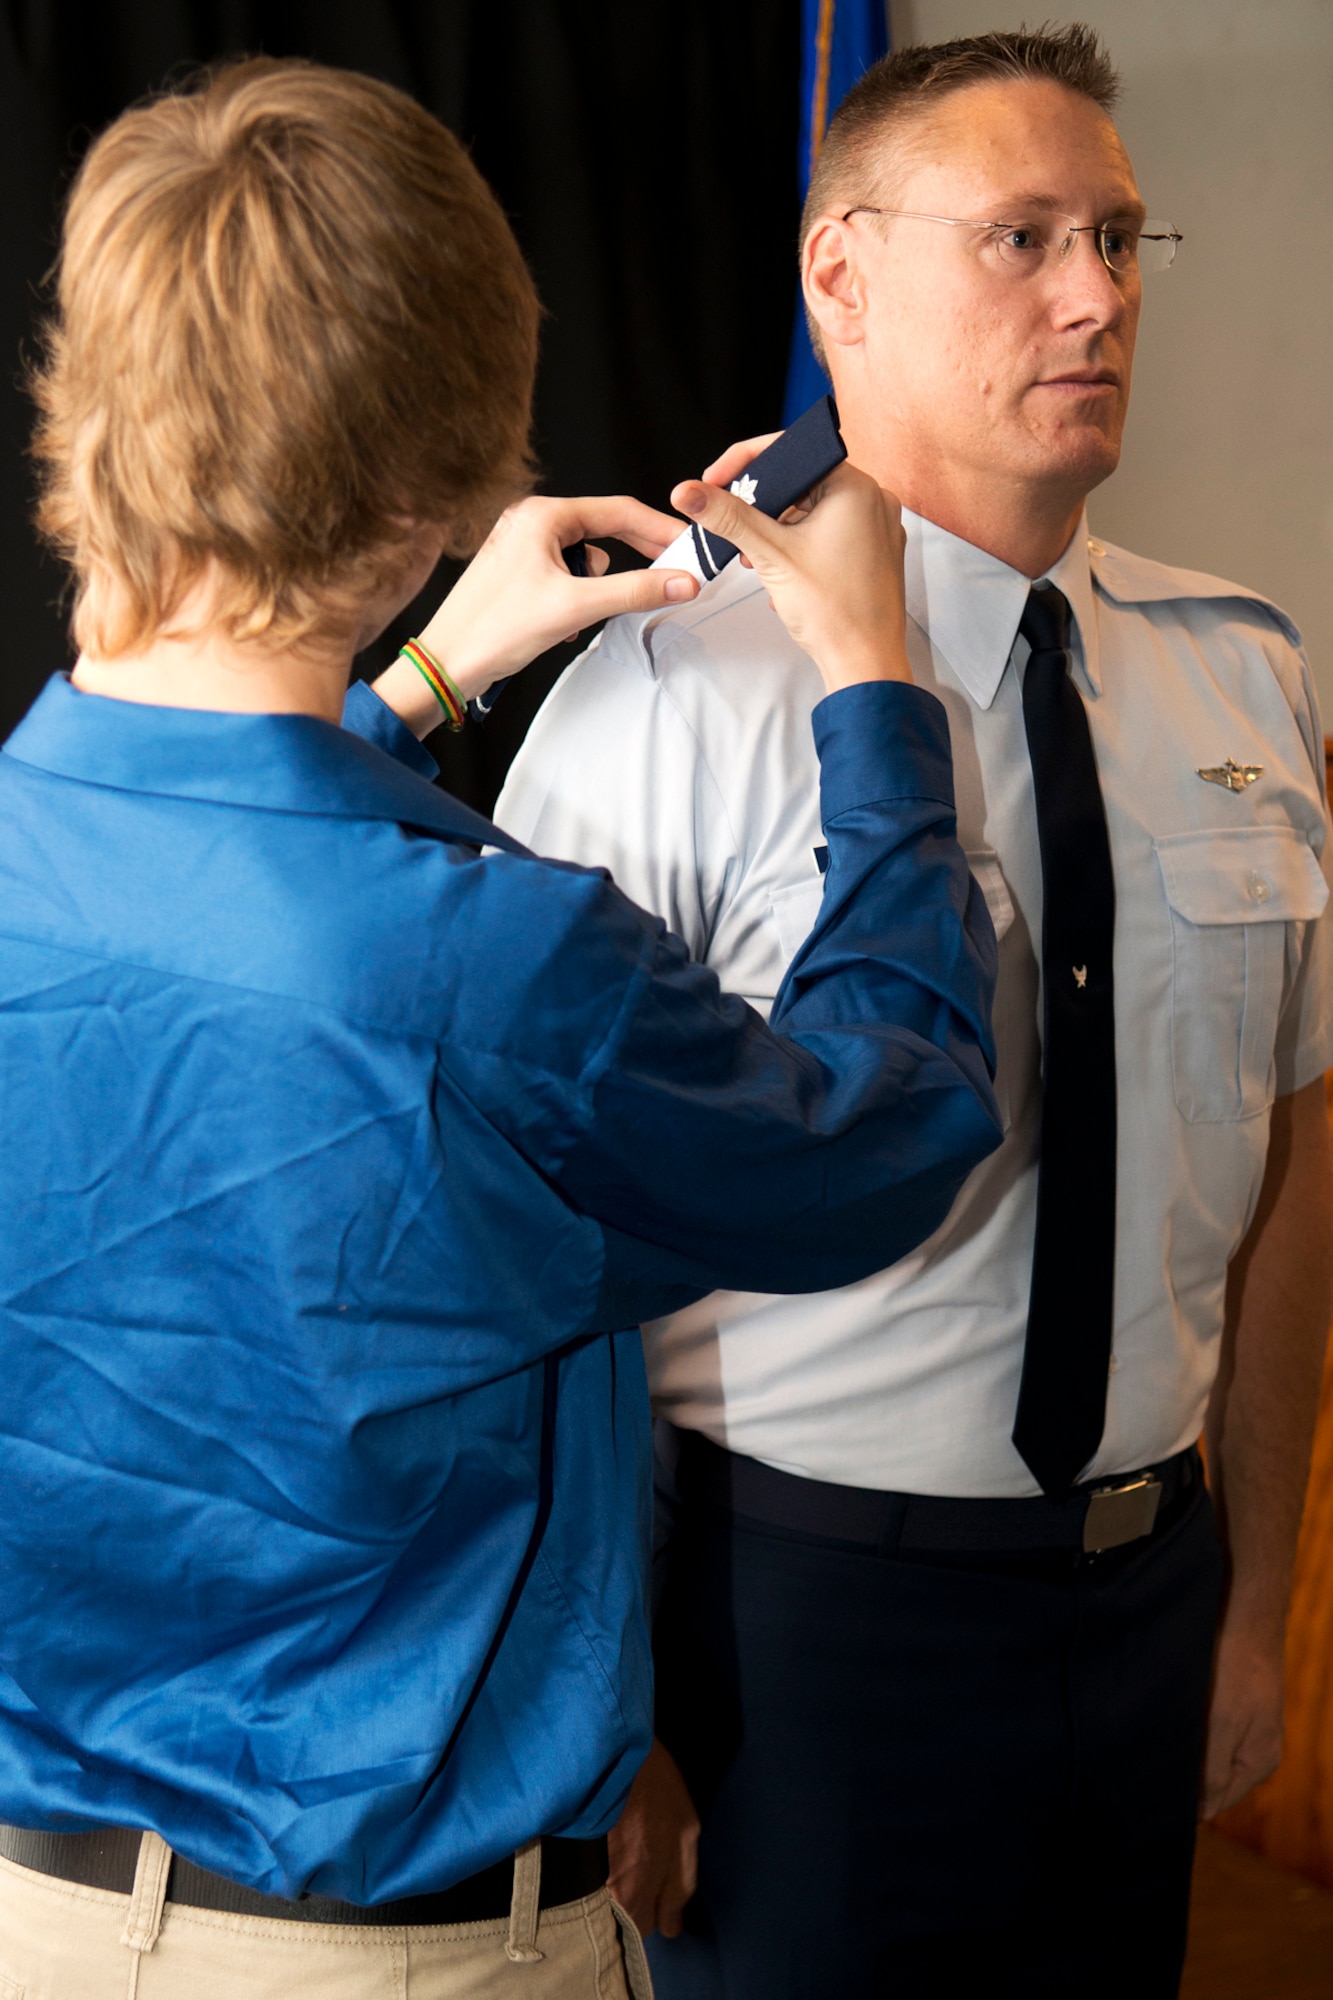 Andrew Hagans puts an epaulette on his dad, Lt. Col. Joseph Hagans, during a Pinning On ceremony, Sept. 28, 2012, Barksdale Air Force Base, La. Hagans was recently promoted to the rank of Lt. Col. and is assigned to the 343rd Bomb Squadron at Barksdale. (U.S. Air Force photo by Master Sgt. Greg Steele/Released)